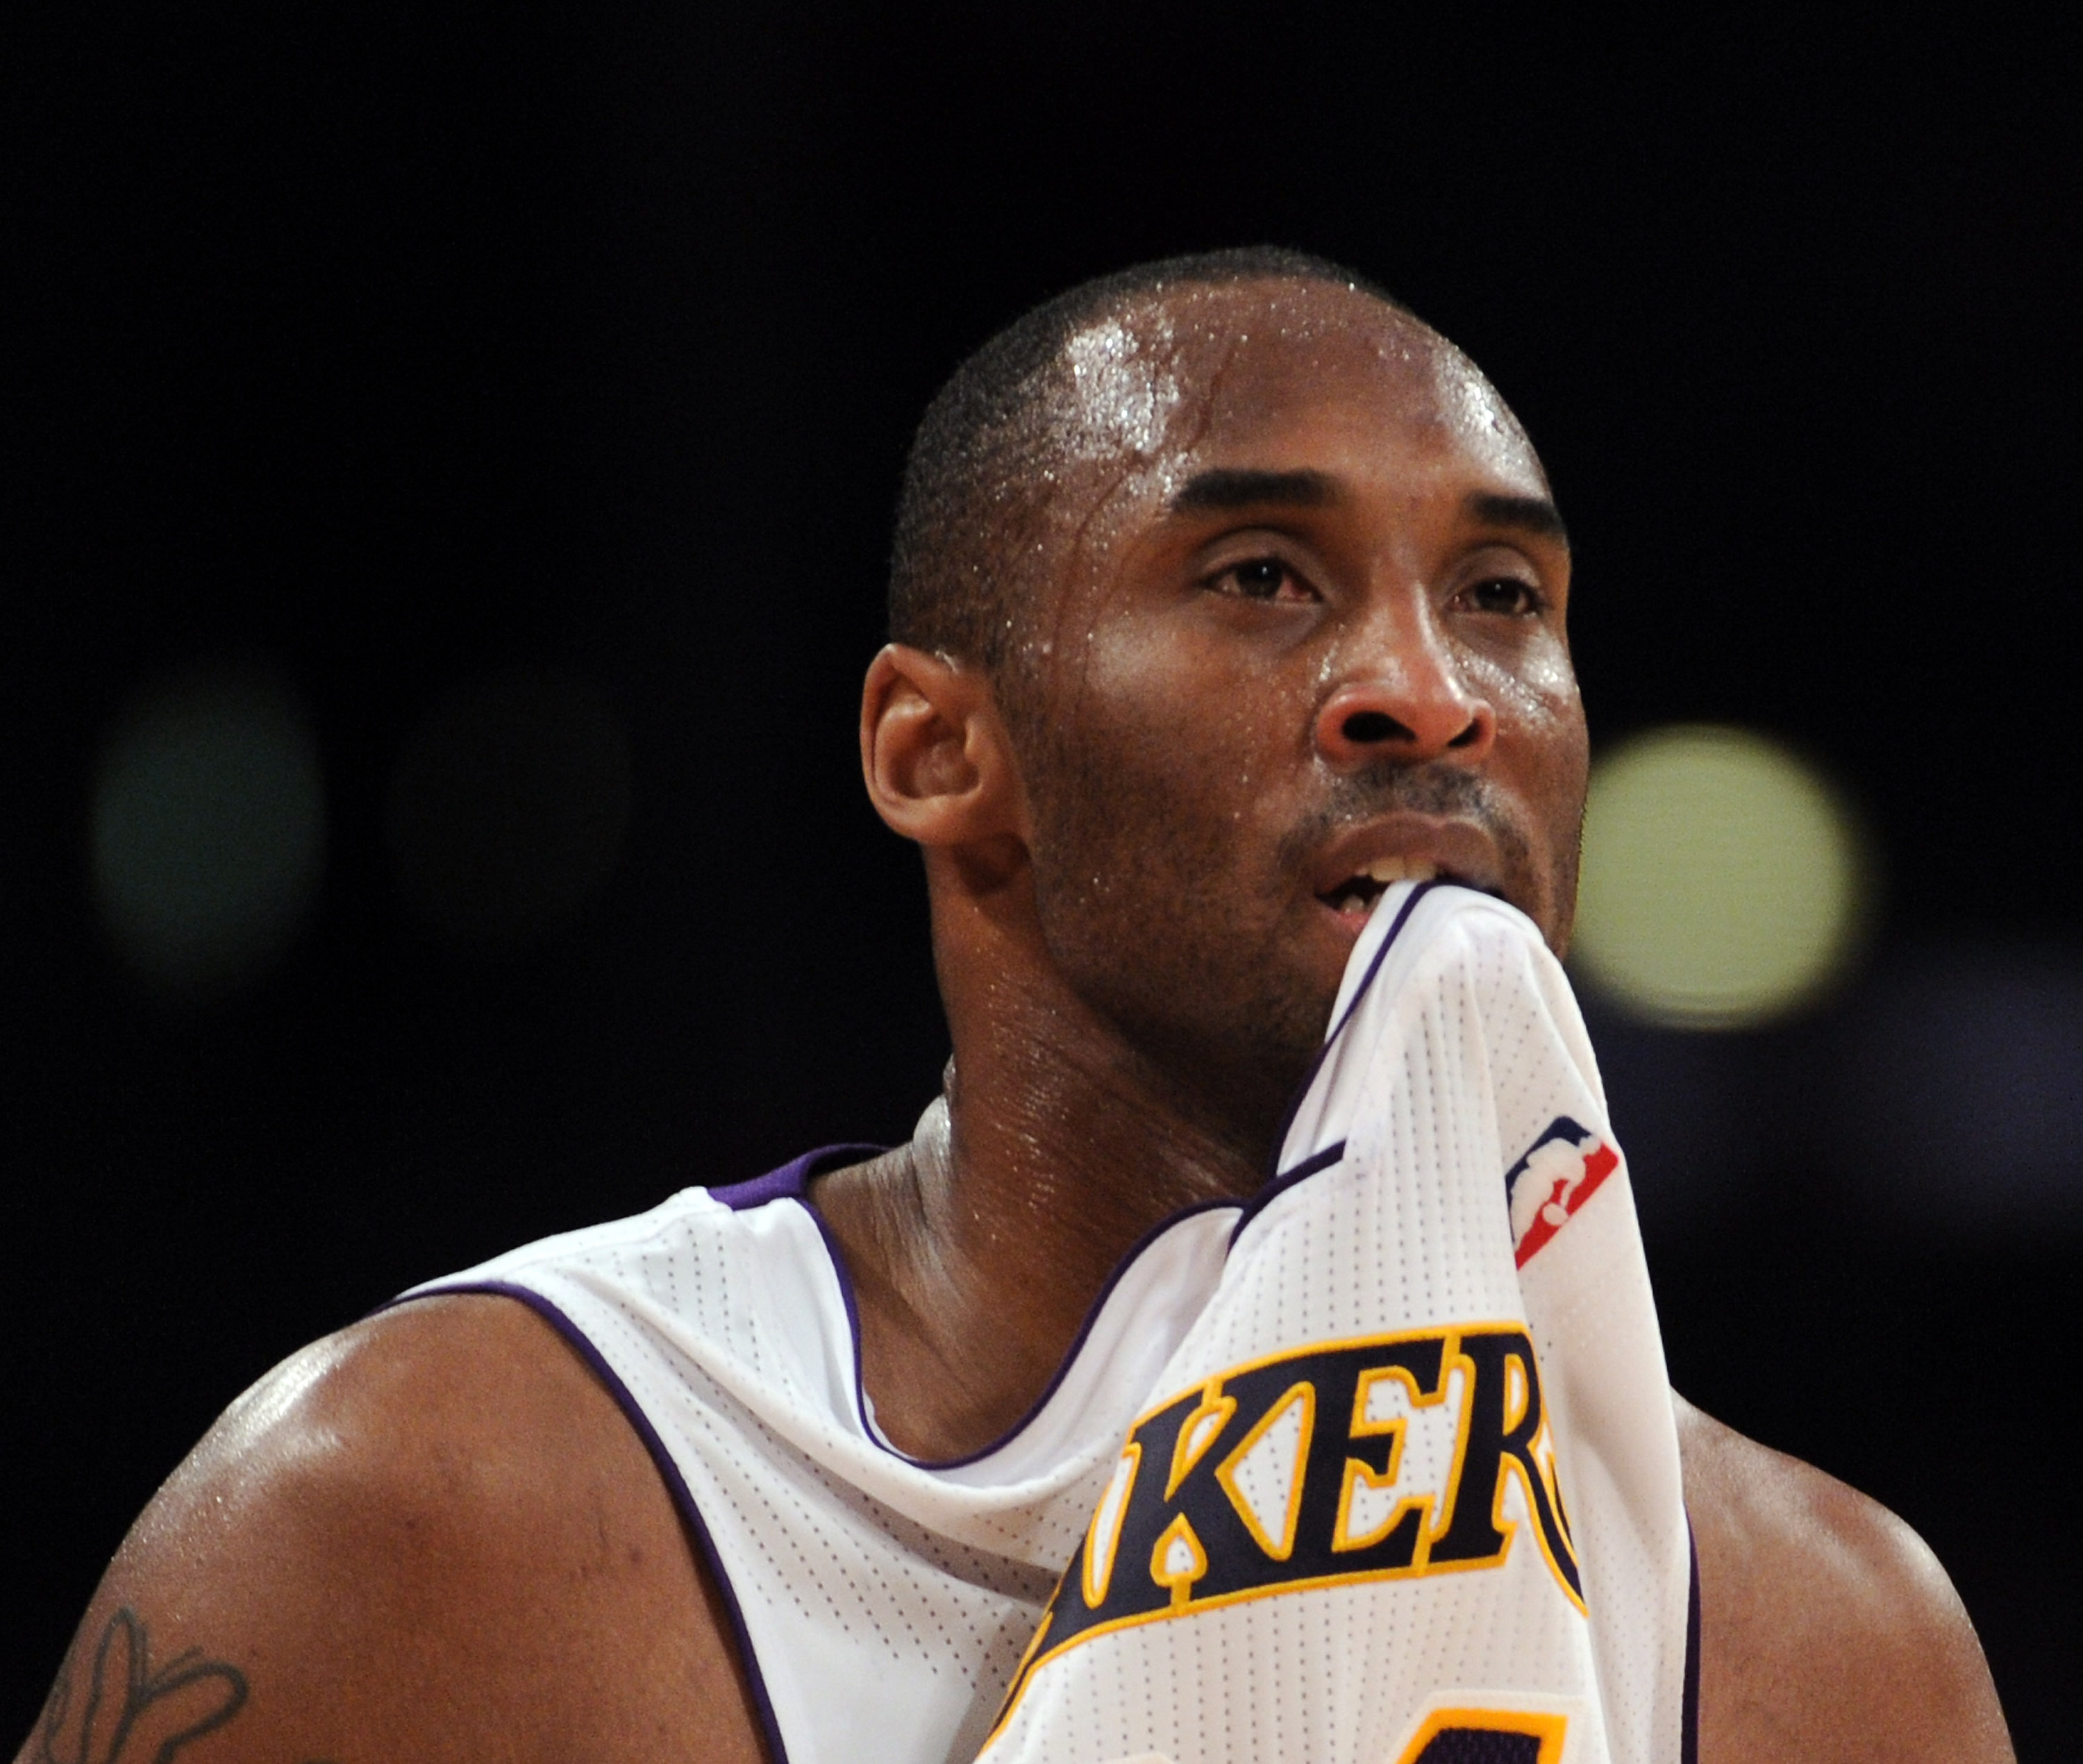 LOS ANGELES, CA - MARCH 20:  Kobe Bryant #24 of the Los Angeles Lakers watches play while biting his jersey against the  Portland Trail Blazers at the Staples Center on March 20, 2011 in Los Angeles, California.  NOTE TO USER: User expressly acknowledges